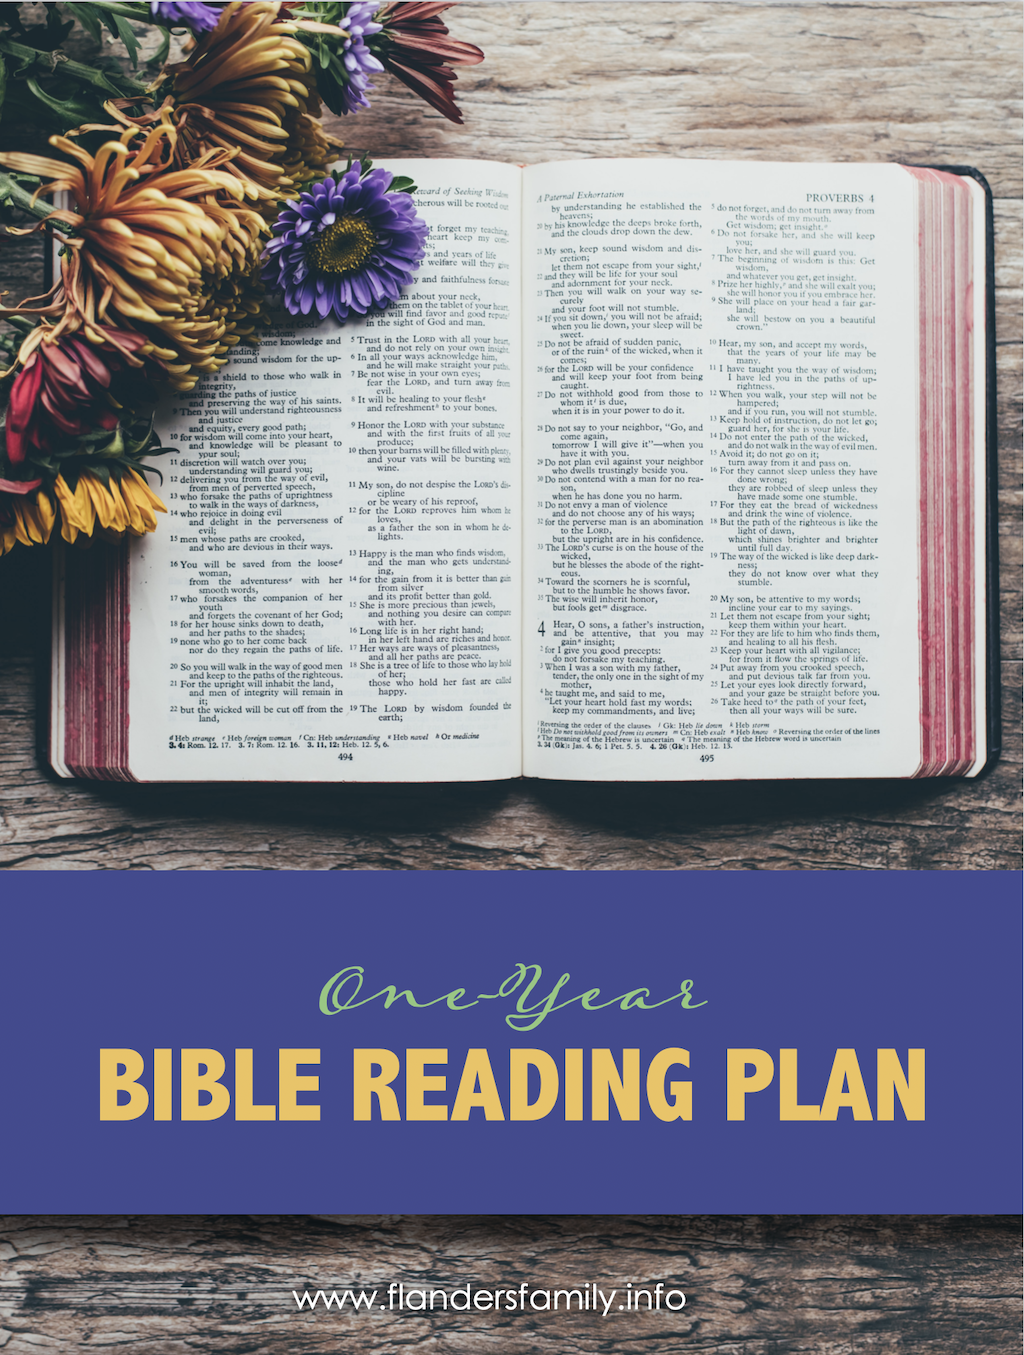 Read through the Bible in a Year